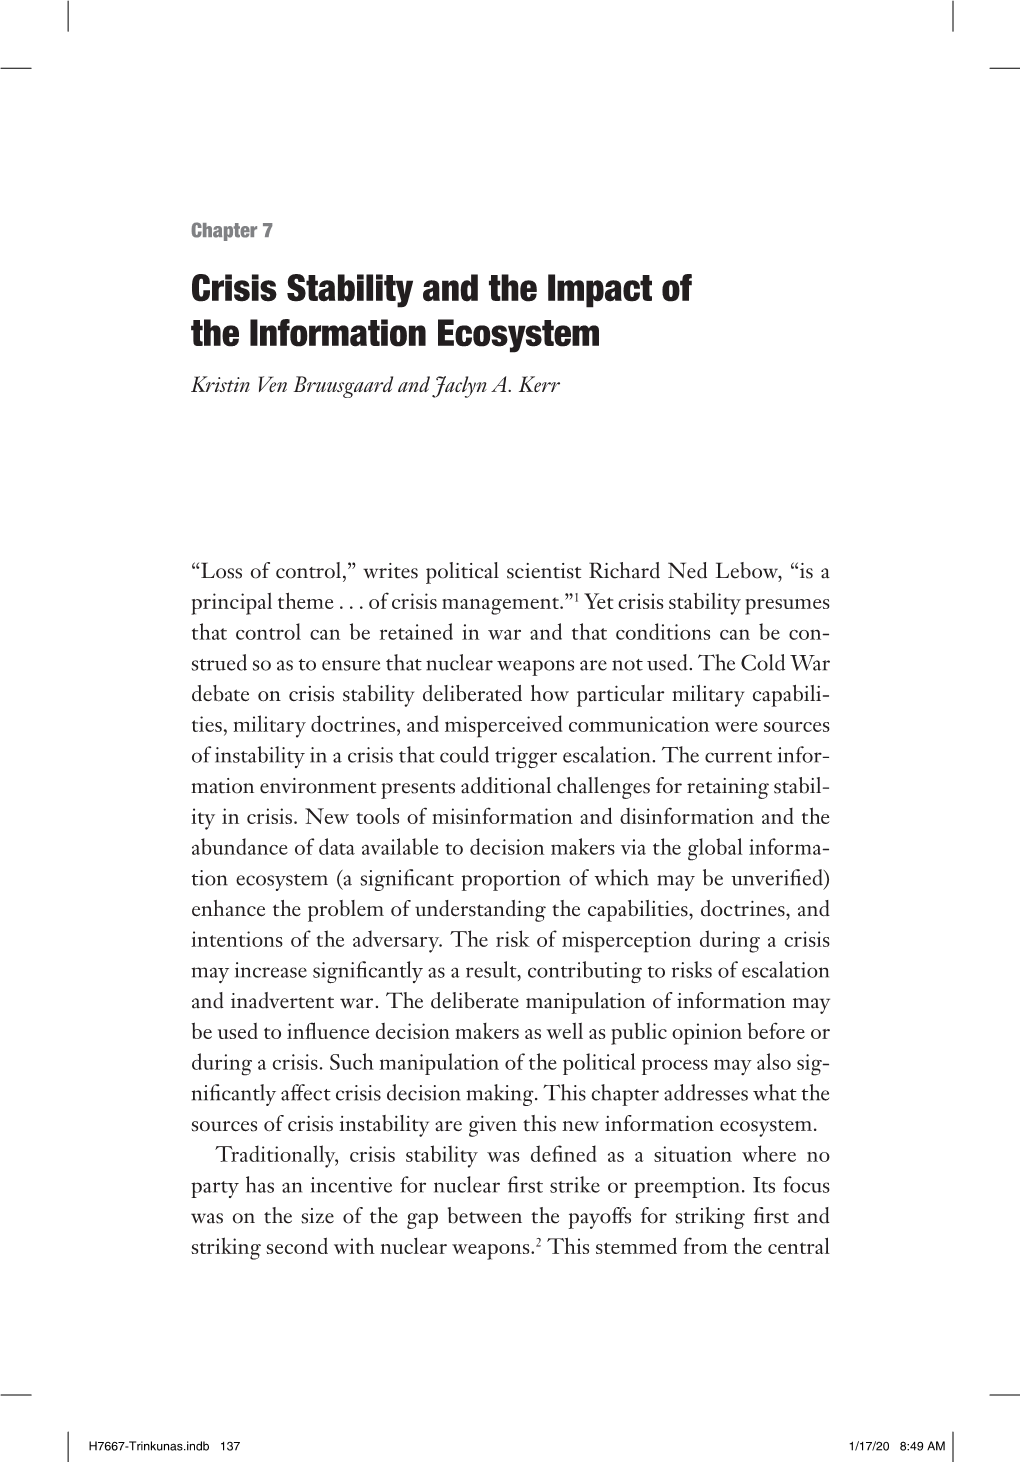 Chapter 7: Crisis Stability and the Impact of the Information Ecosystem